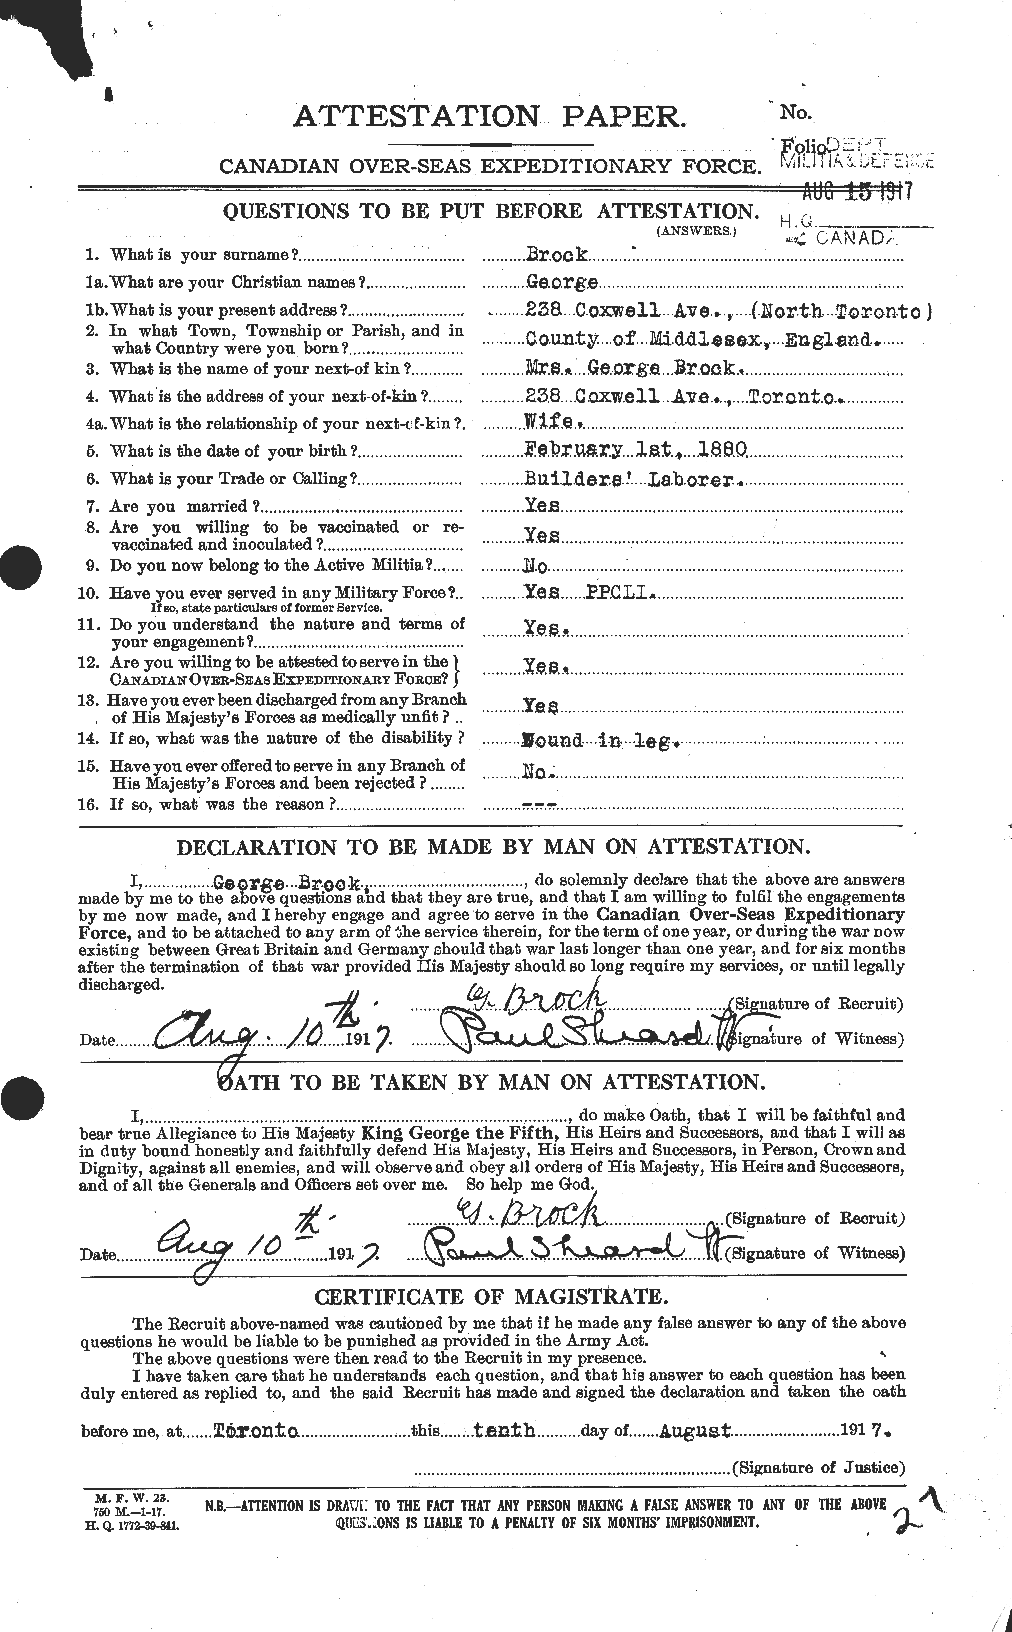 Personnel Records of the First World War - CEF 258198a